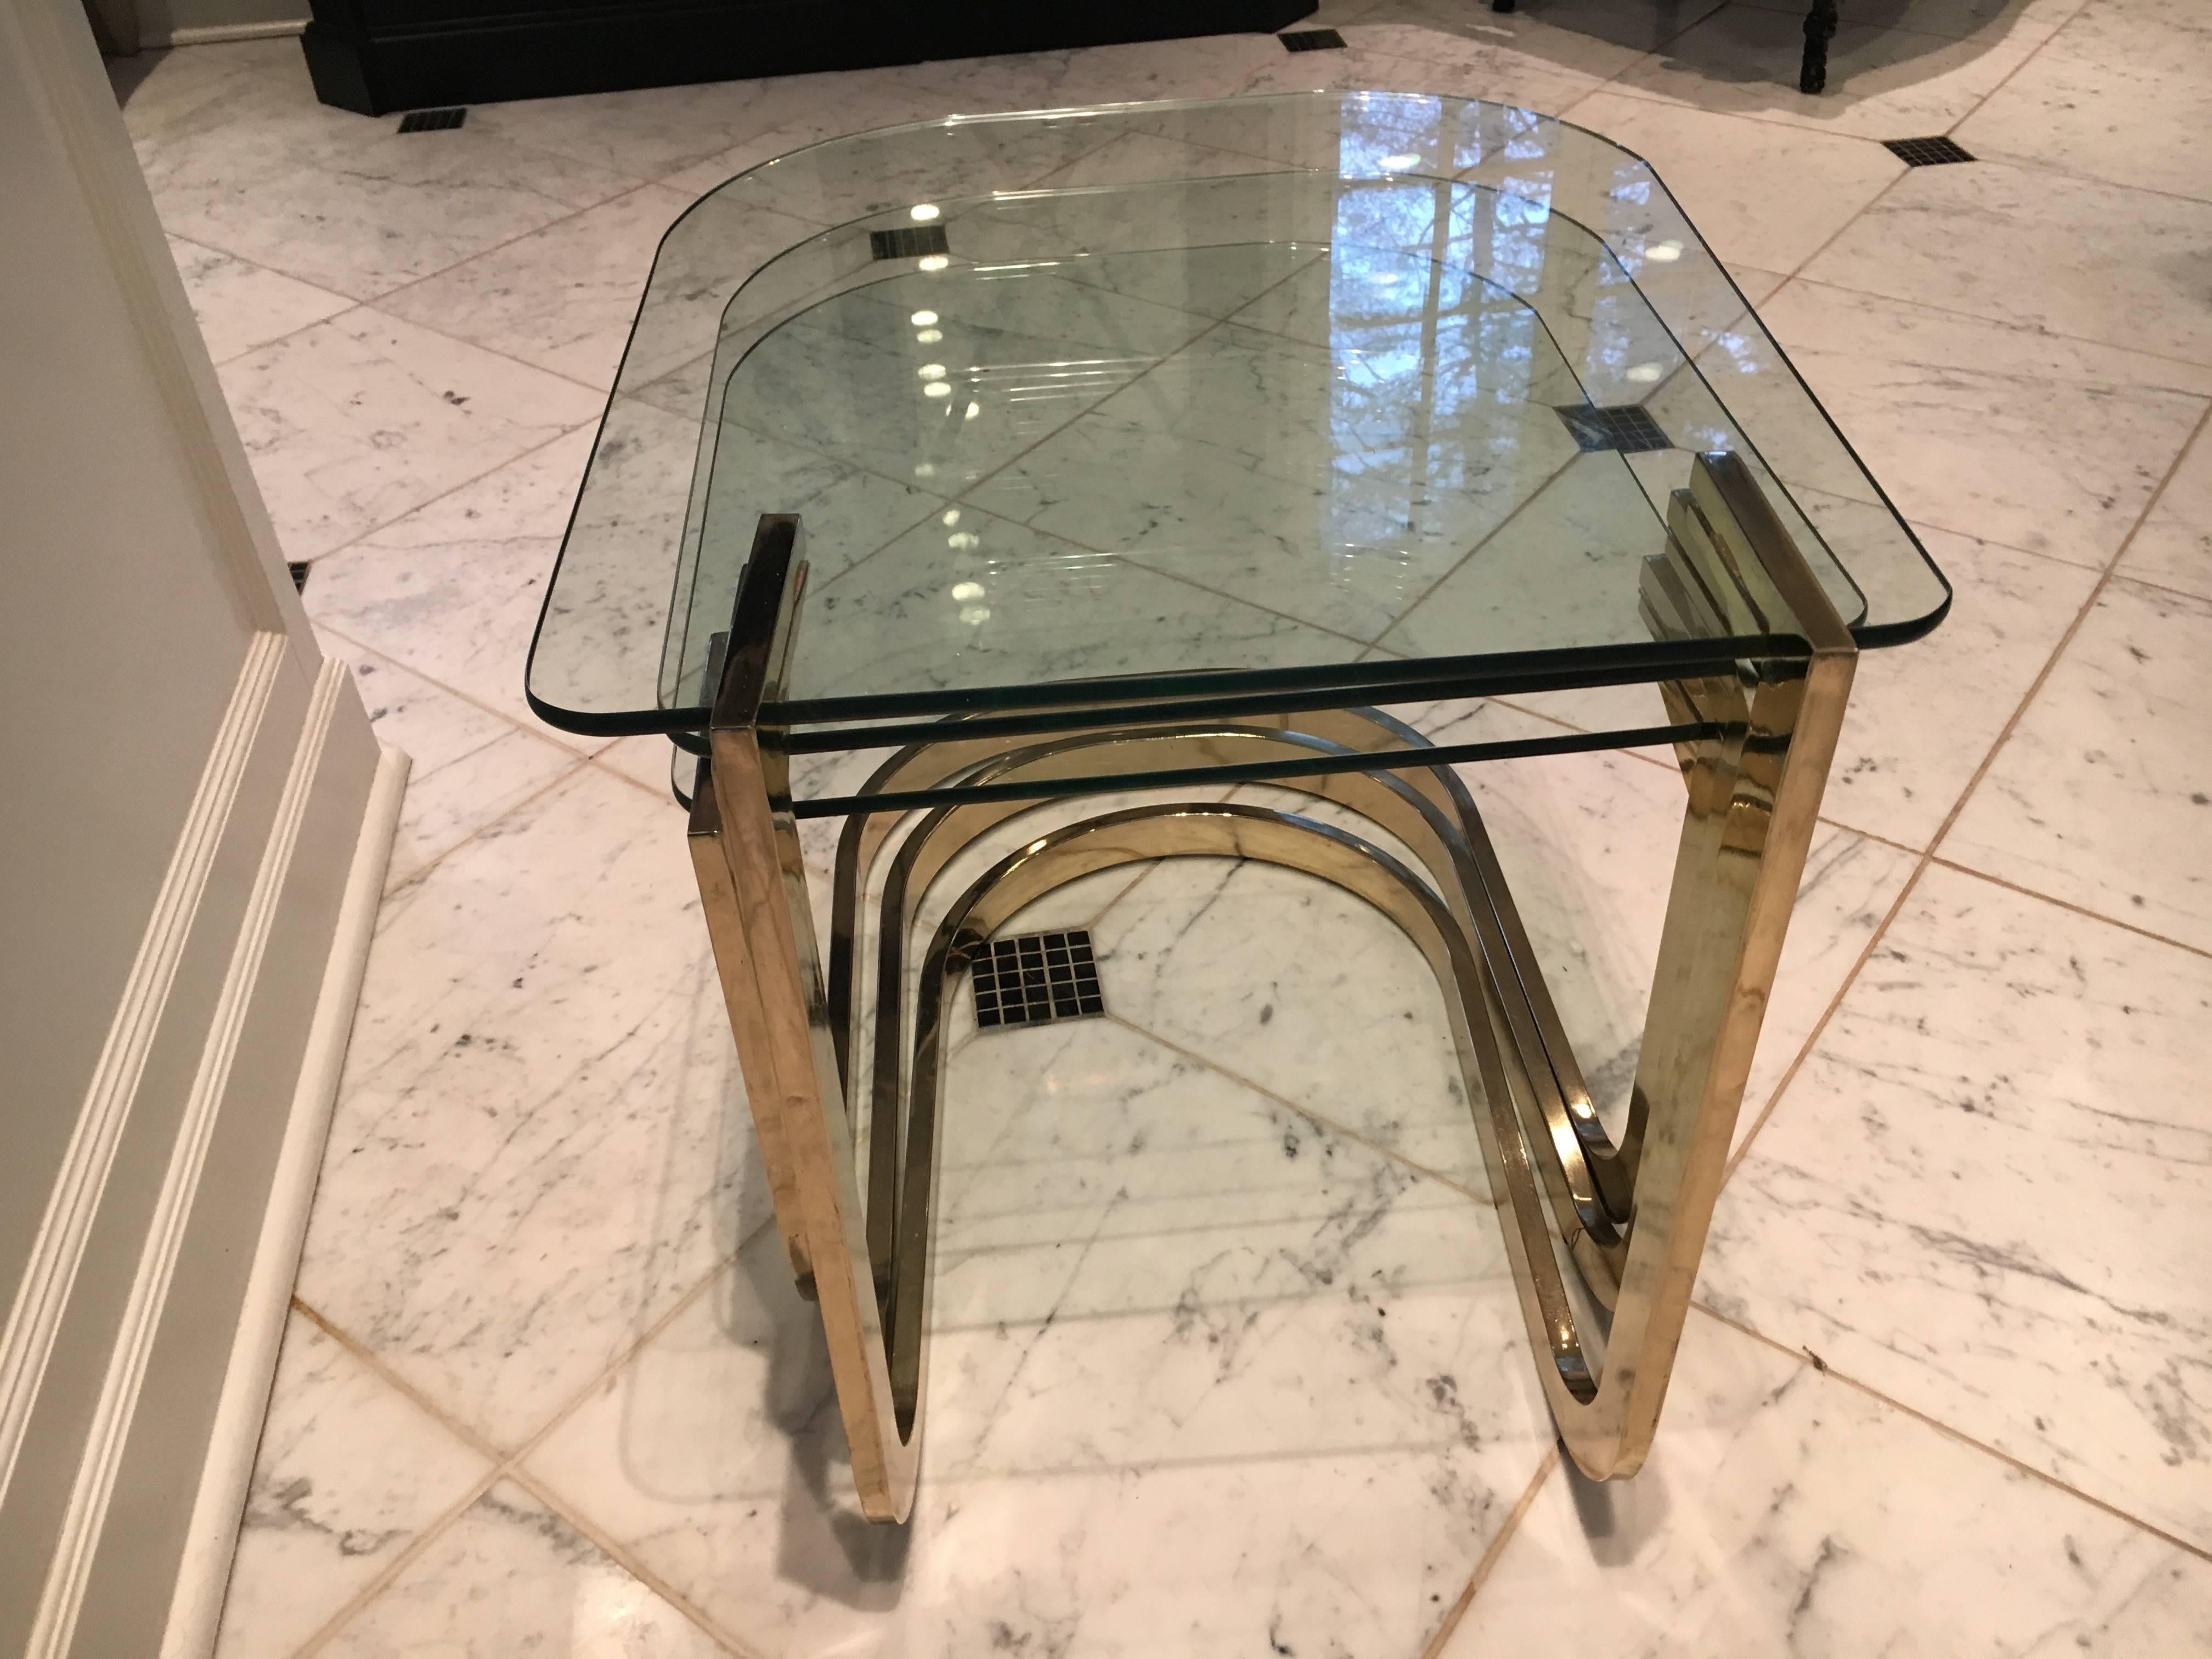 Set of three nesting tables by Milo Baughman for Design Institute of America. Handsome and versatile, these brass and glass tables add Mid-Century modern pizazz anywhere. Brass is in perfect condition with no pitting. The bottom two tables are in